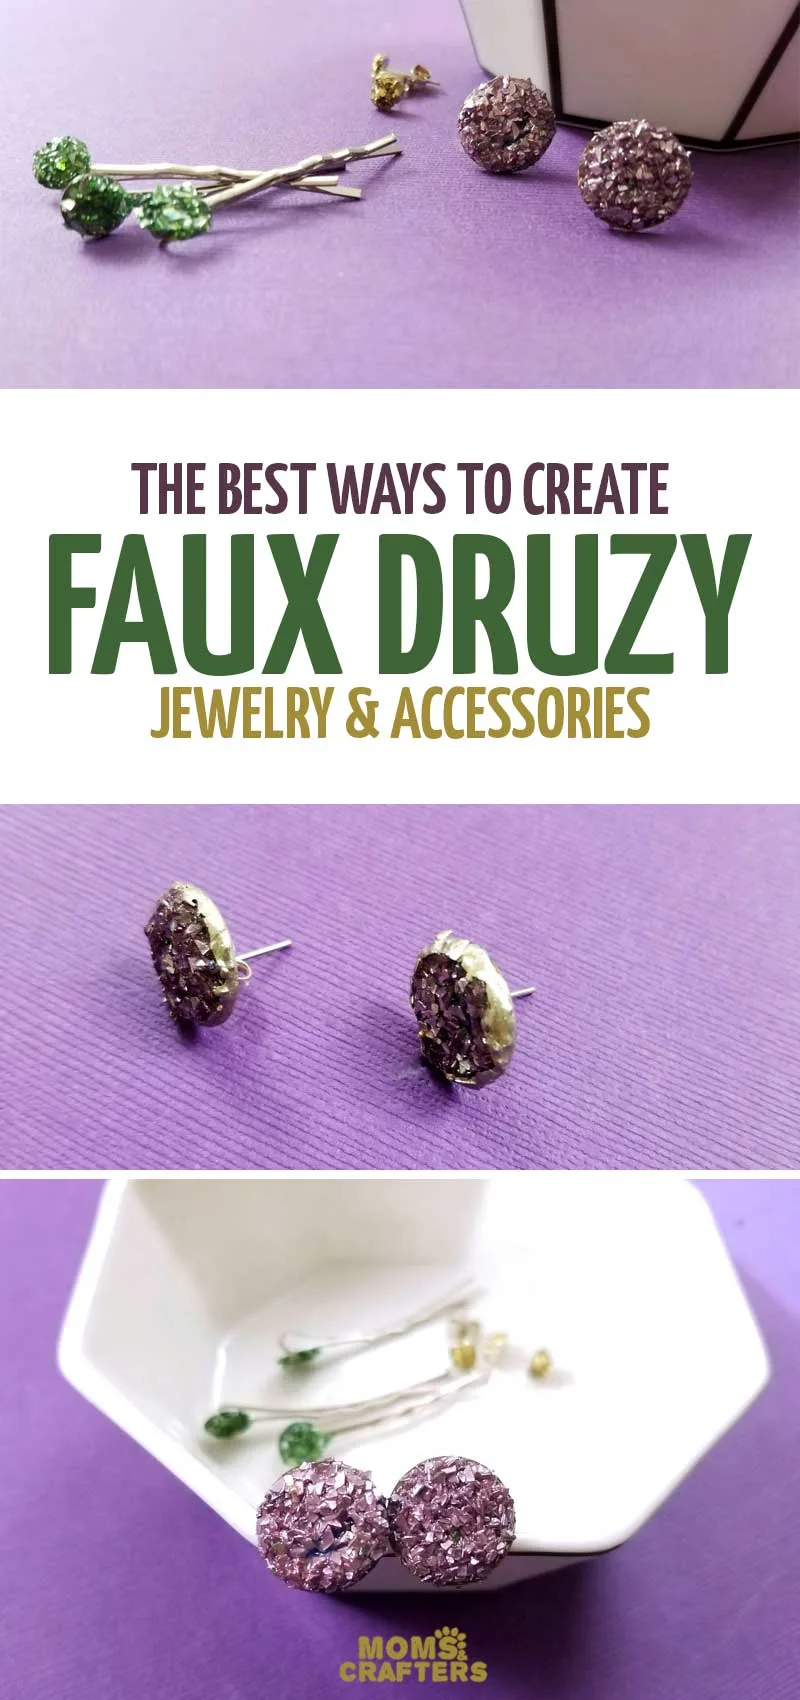 Make these beautiful faux druzy earrings DIY - a faux agate druze jewelry making tutorial for beginners! This easy jewellery project uses crushed glass glitter and features experimentaiton to narrow down the best way to craft this cool jewelry making project for teens and tweens - and adults!